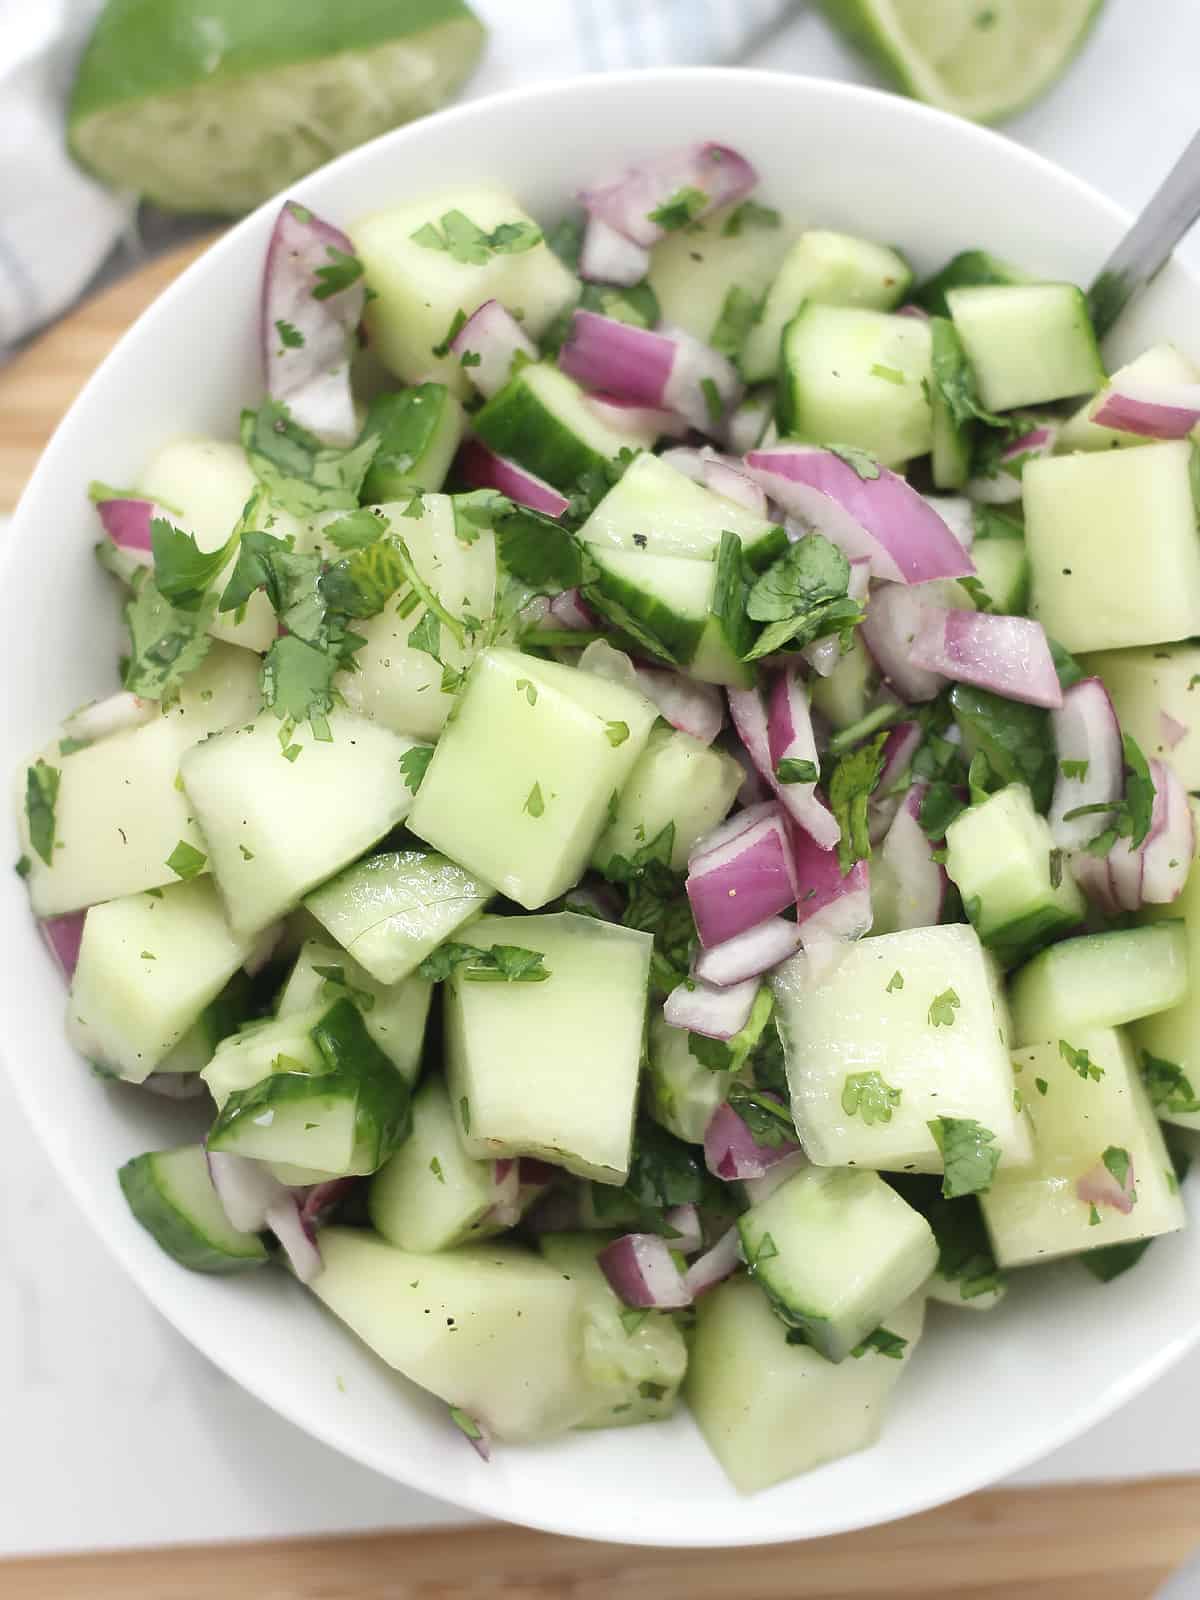 Chunks of melon and cucumber in a bowl mixed with red onion and cilantro.